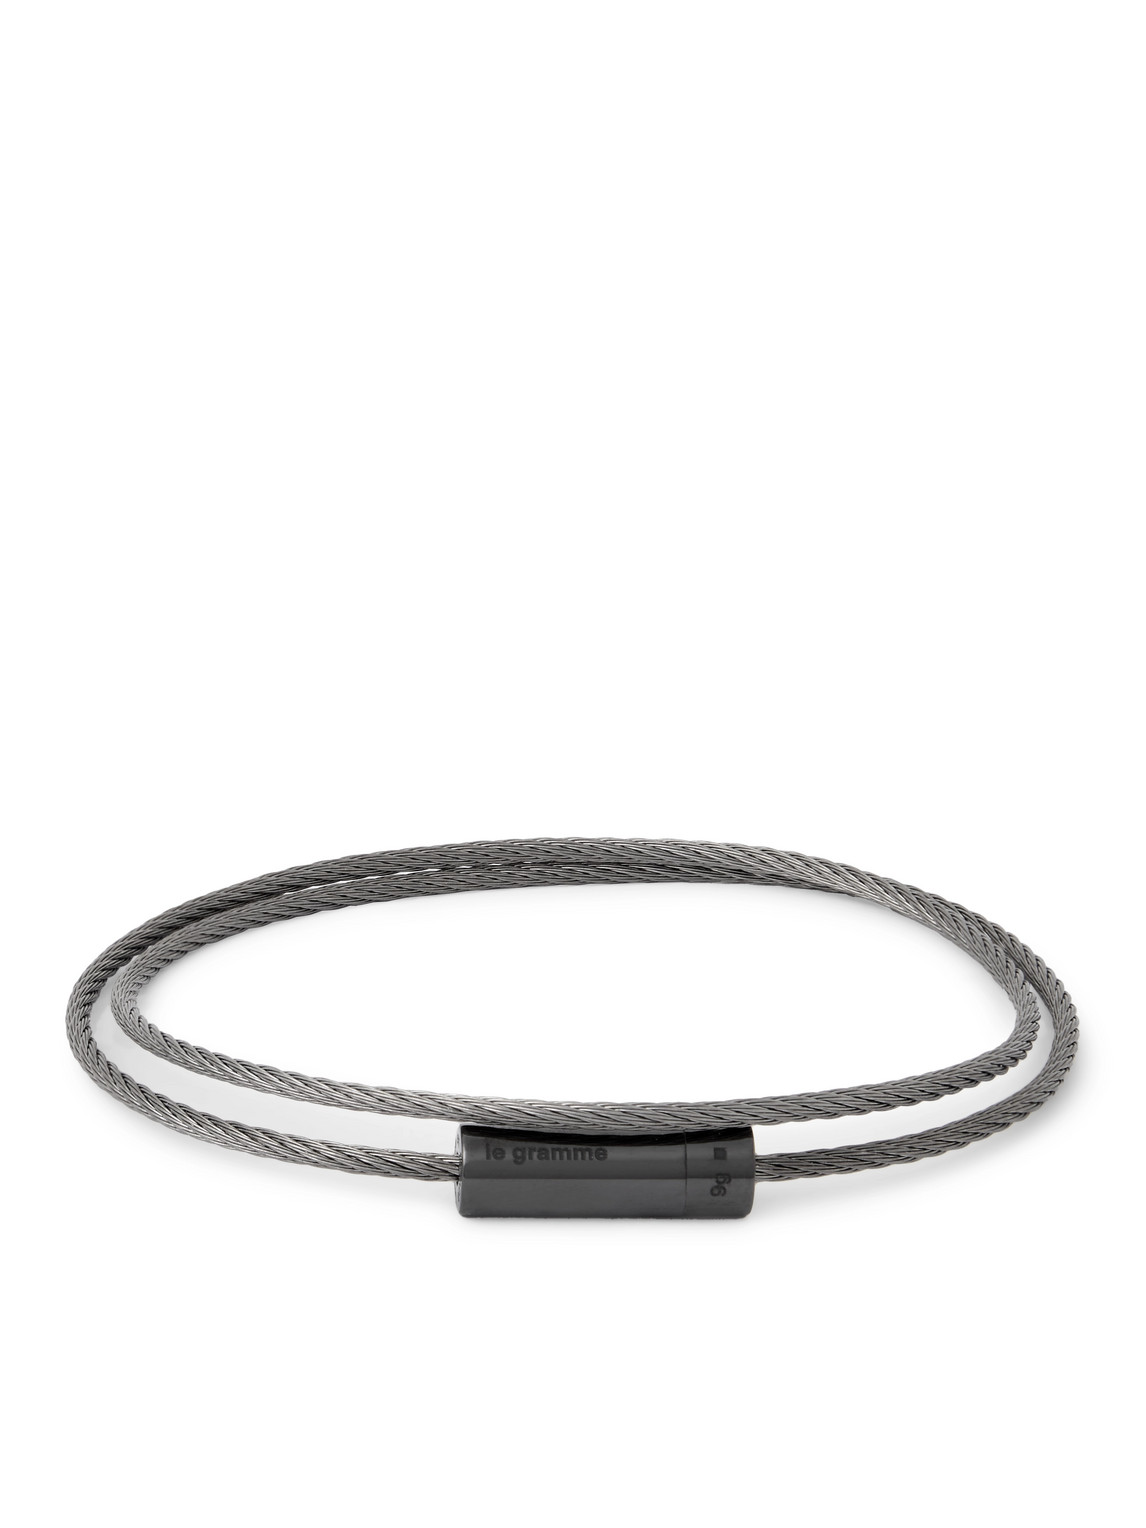 Le Gramme 9g Double Cable Silver Recycled-ceramic Bracelet In Black